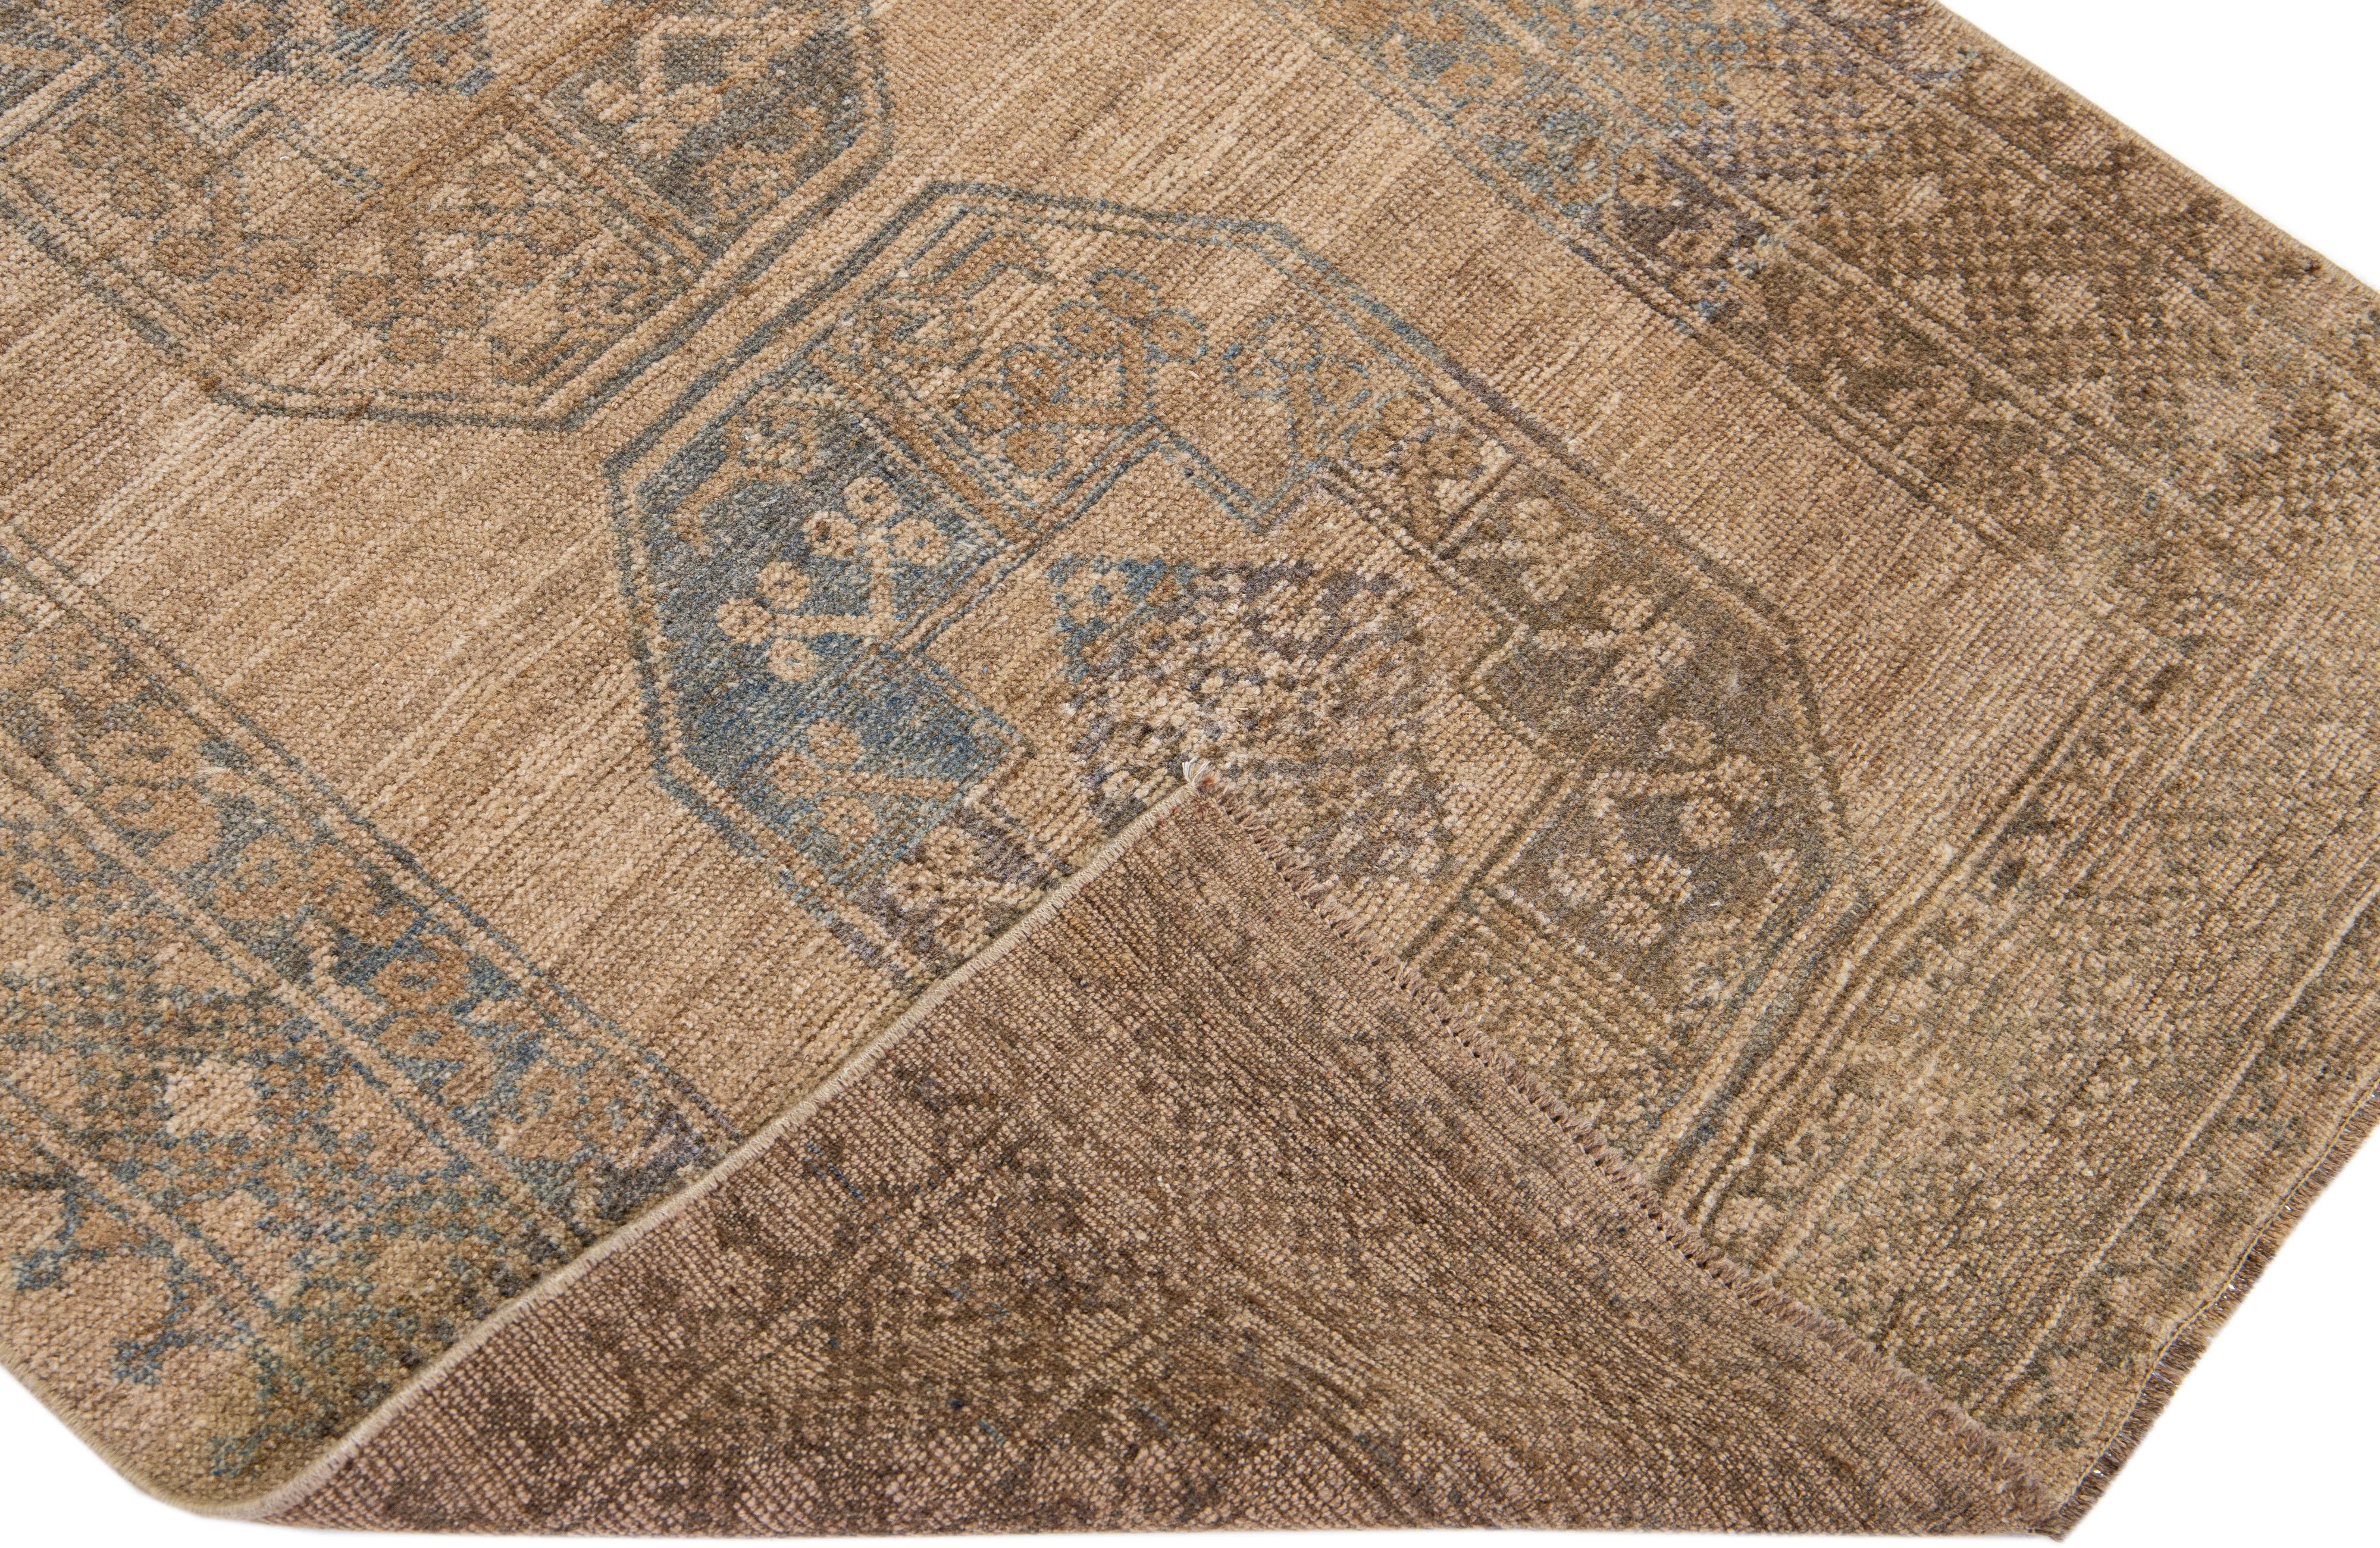 Beautiful antique Turkmen hand-knotted wool rug with a brown color field. This piece has blue accents in an all-over Gul pattern design.

This rug measures: 3'3